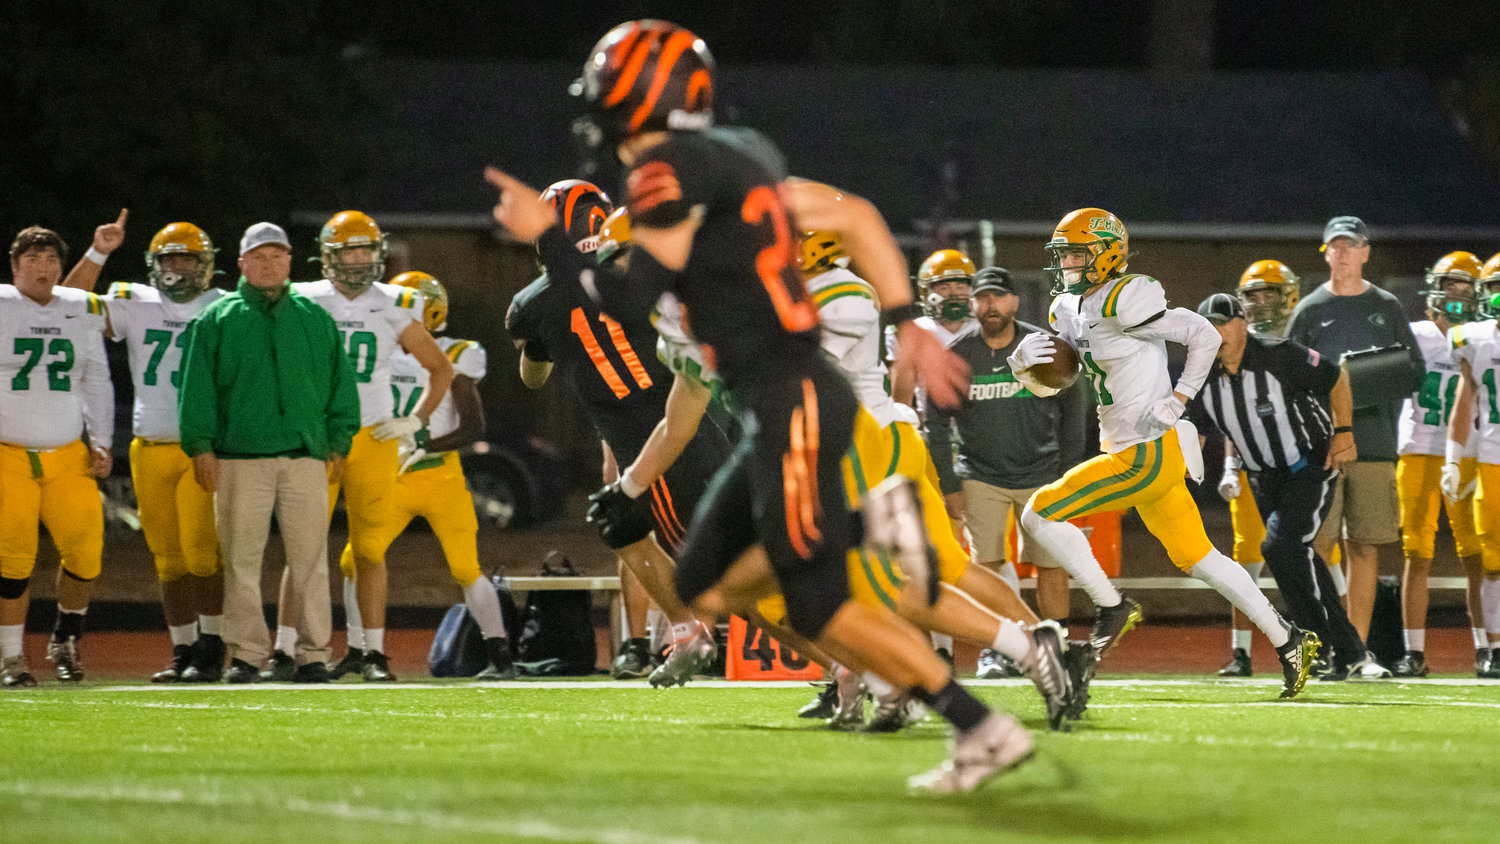 Tumwater senior Luke Reid (11) runs a kick back to the end zone during a game against Centralia Friday night.